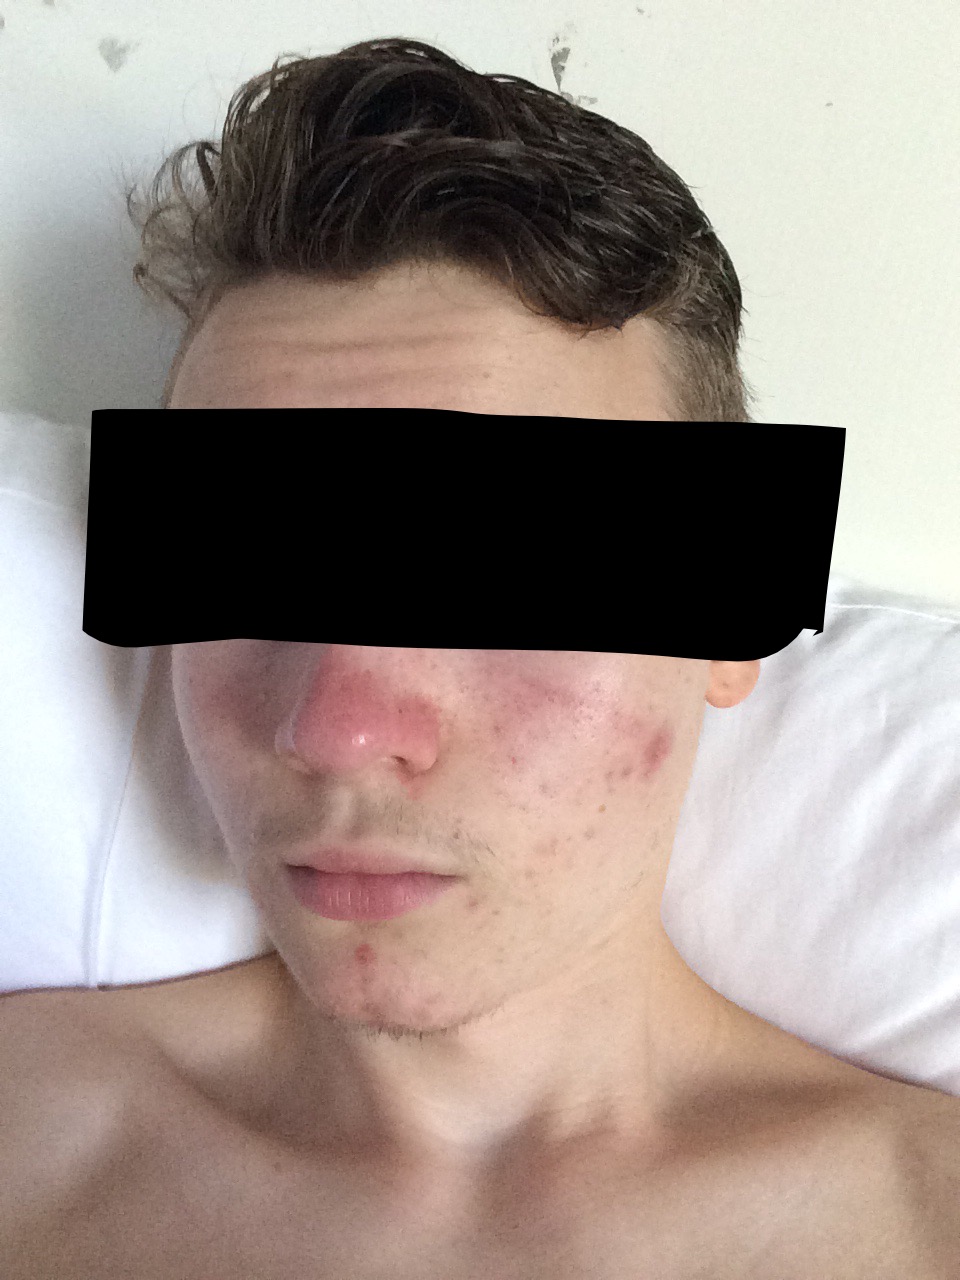 Red Face Nose After Shower Rosacea By Jakobs Rosacea And Facial